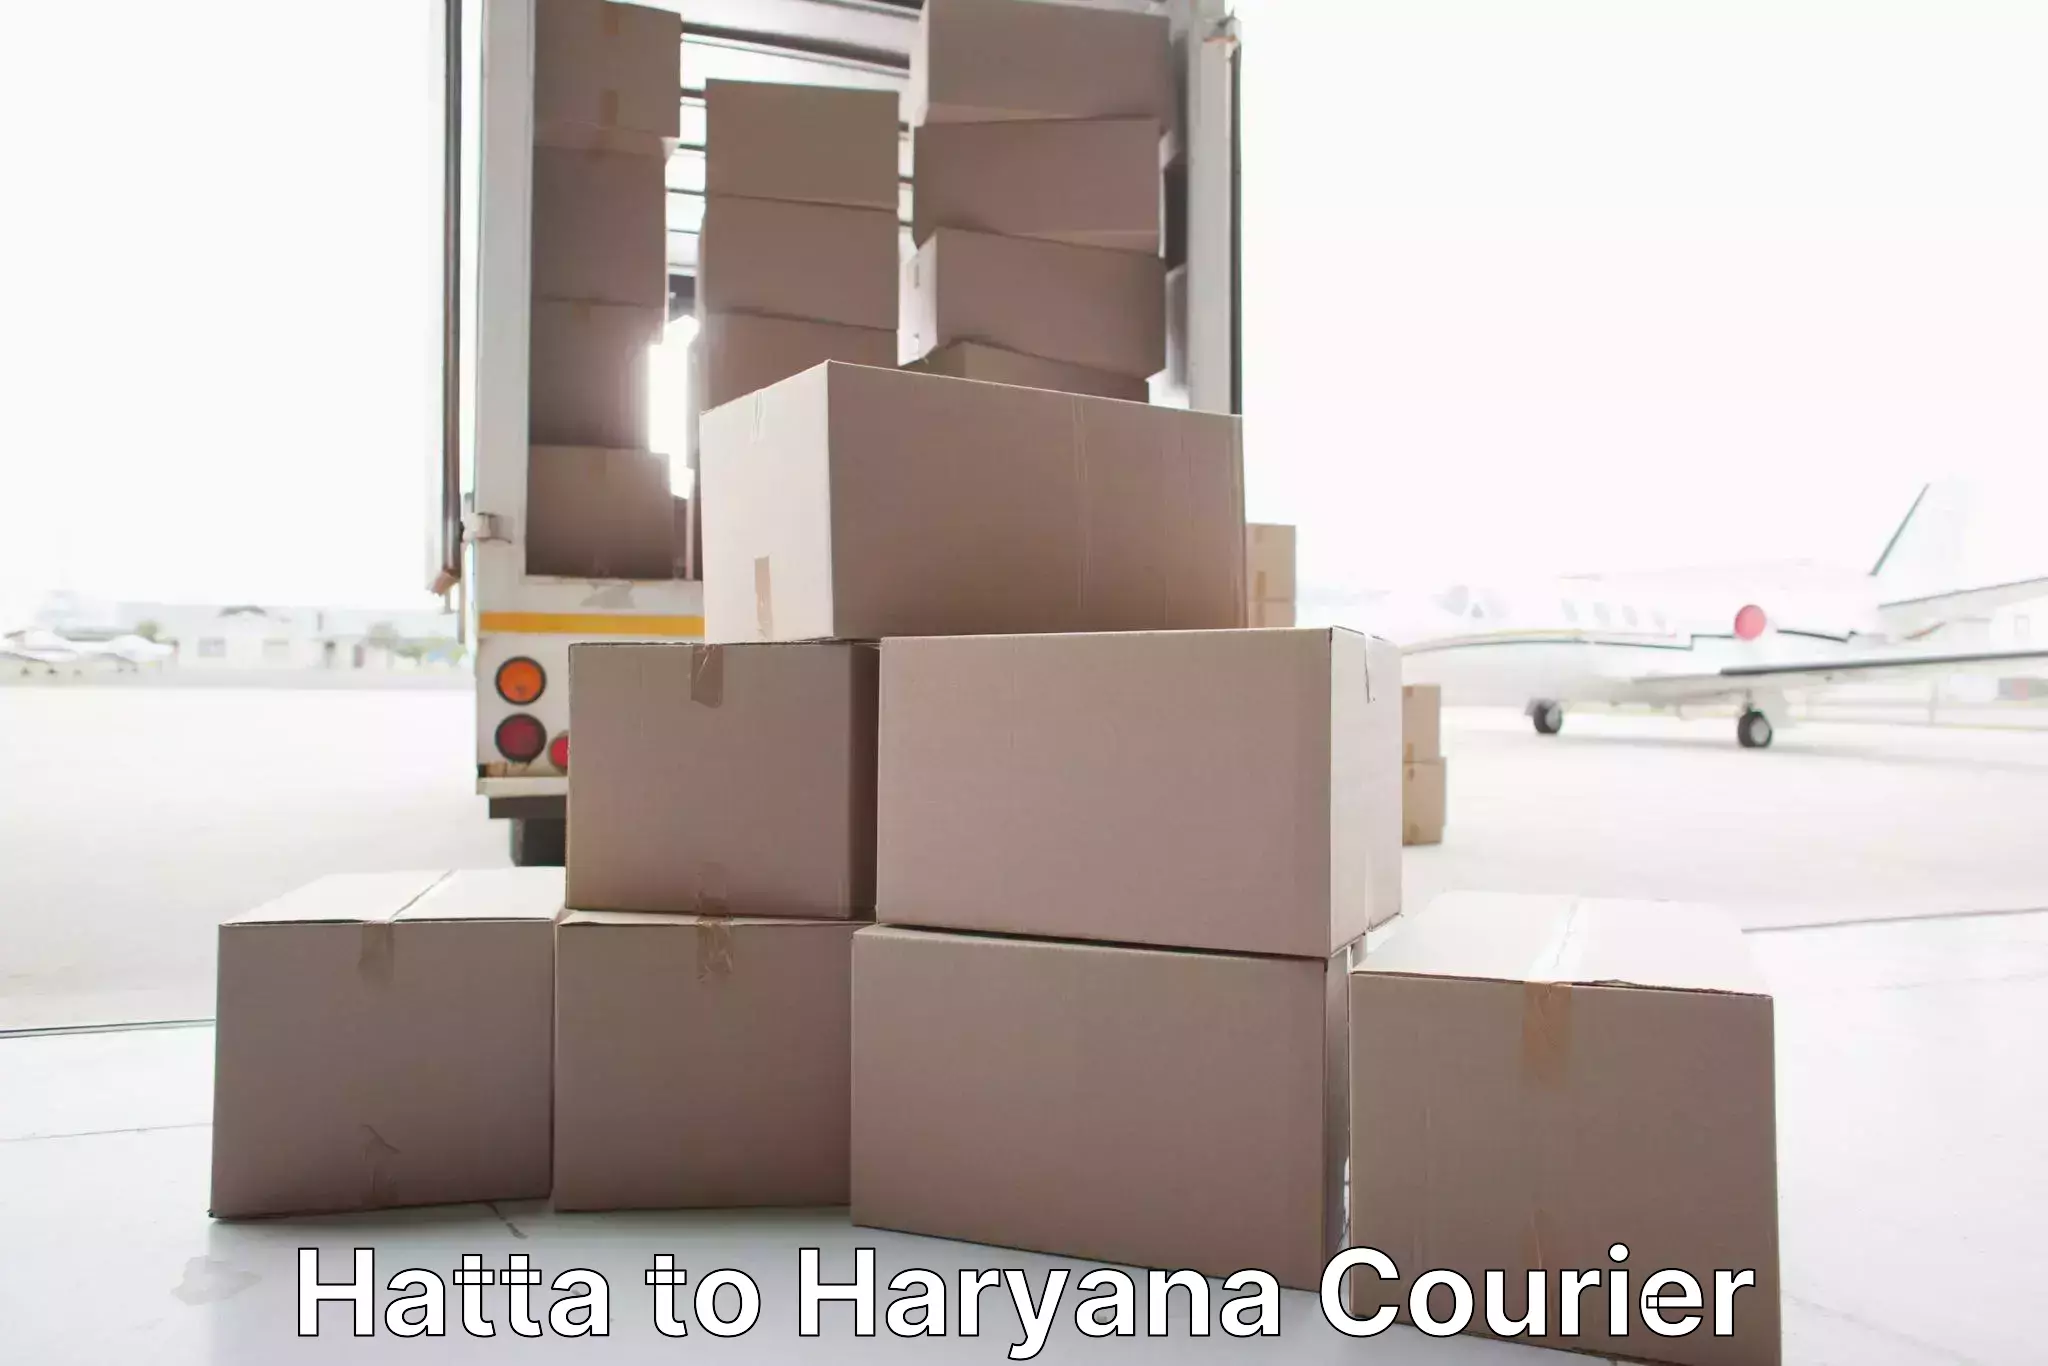 Trusted relocation experts Hatta to Haryana